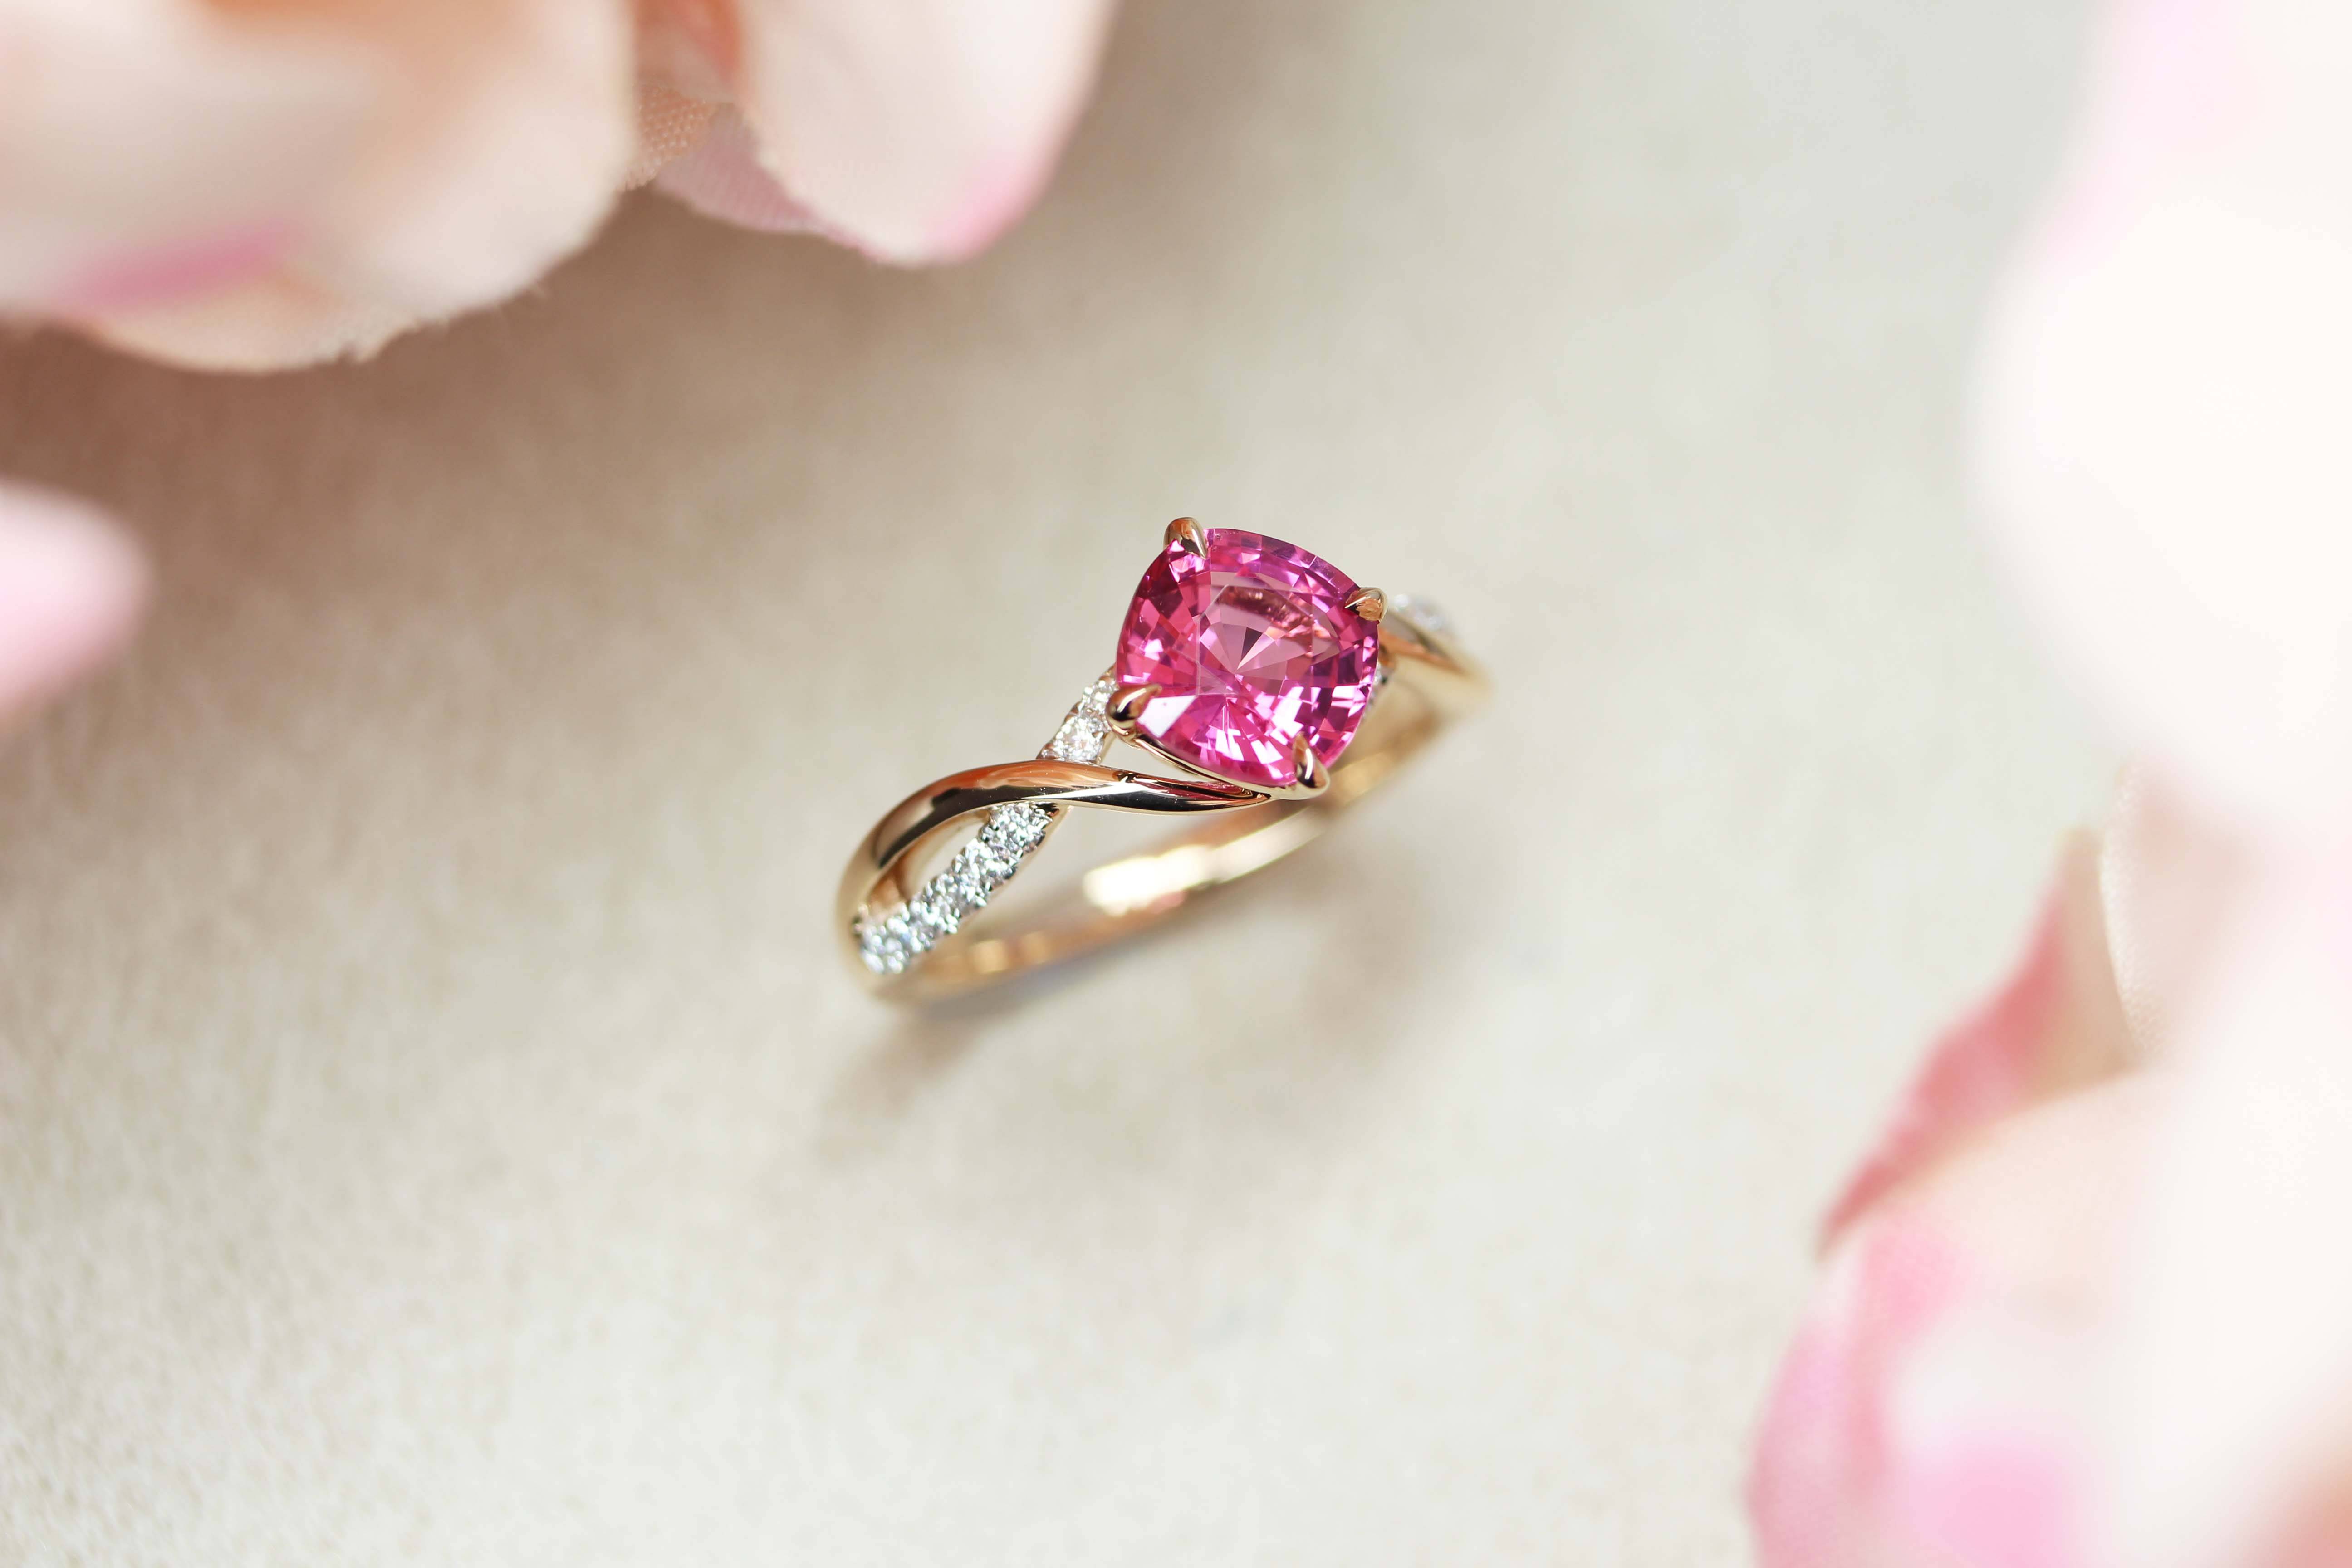 Customised Pink coloured gemstone Spinel Proposal Ring, customised a unique ring for wedding proposal - vivid Pink coloured Spinel gemstone customised for the couple | Local Singapore Jeweller in custom made wedding jewellery.